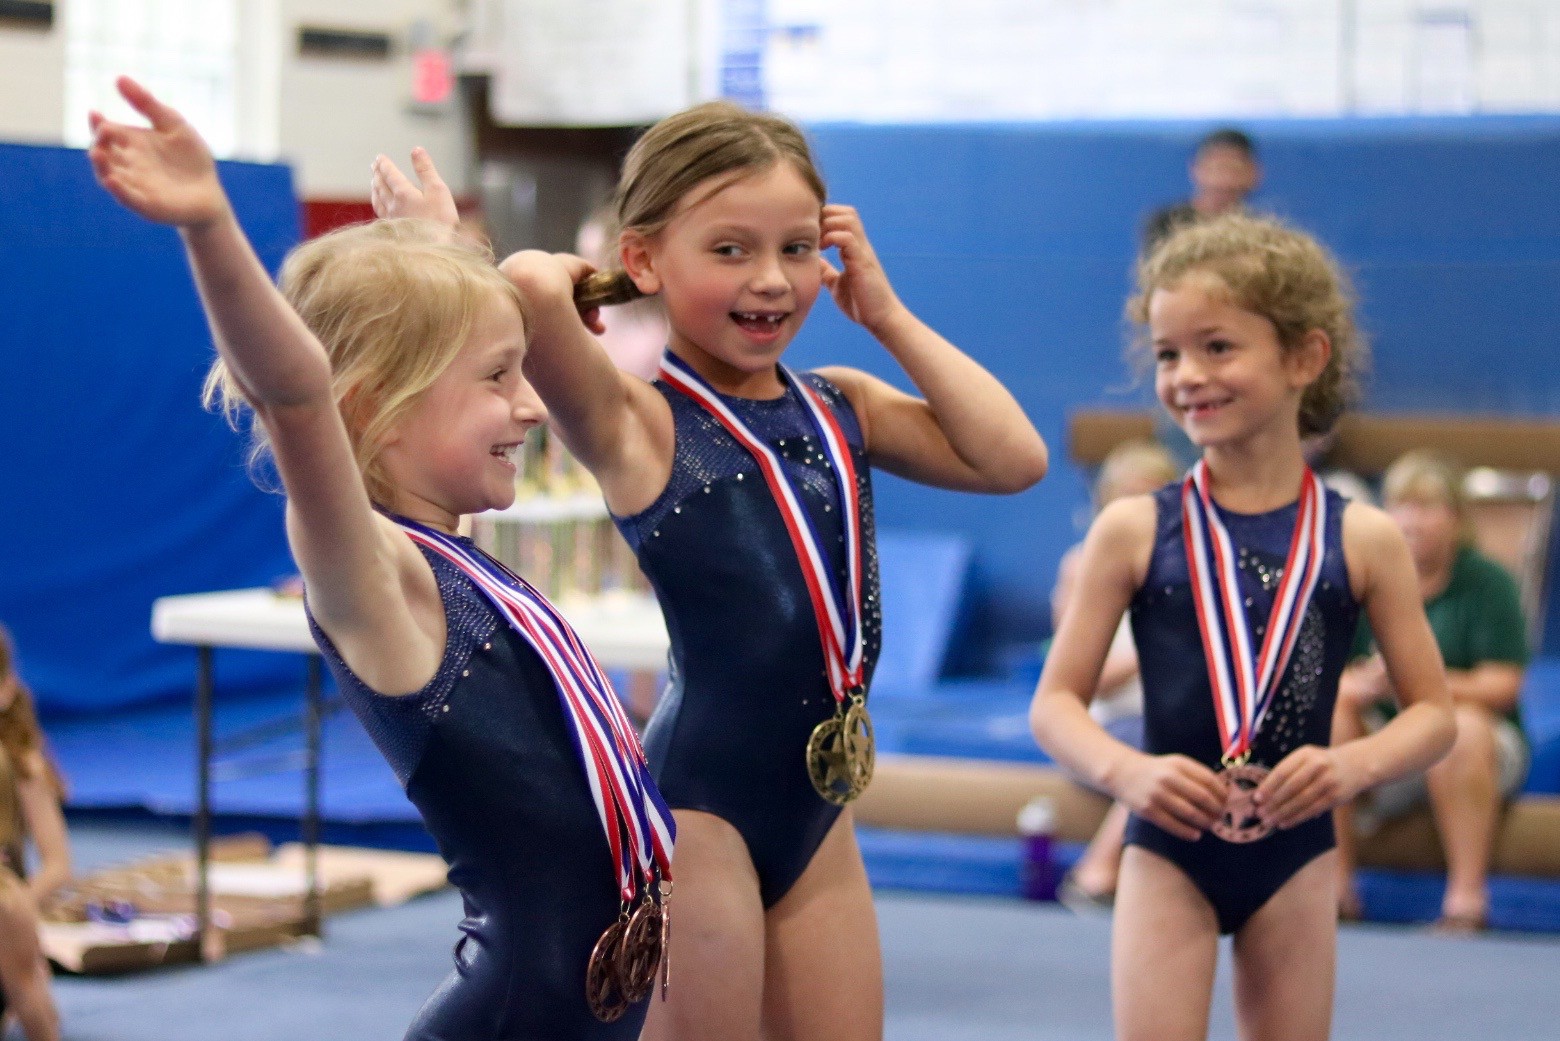 Level 1s receiving medals at a home meet